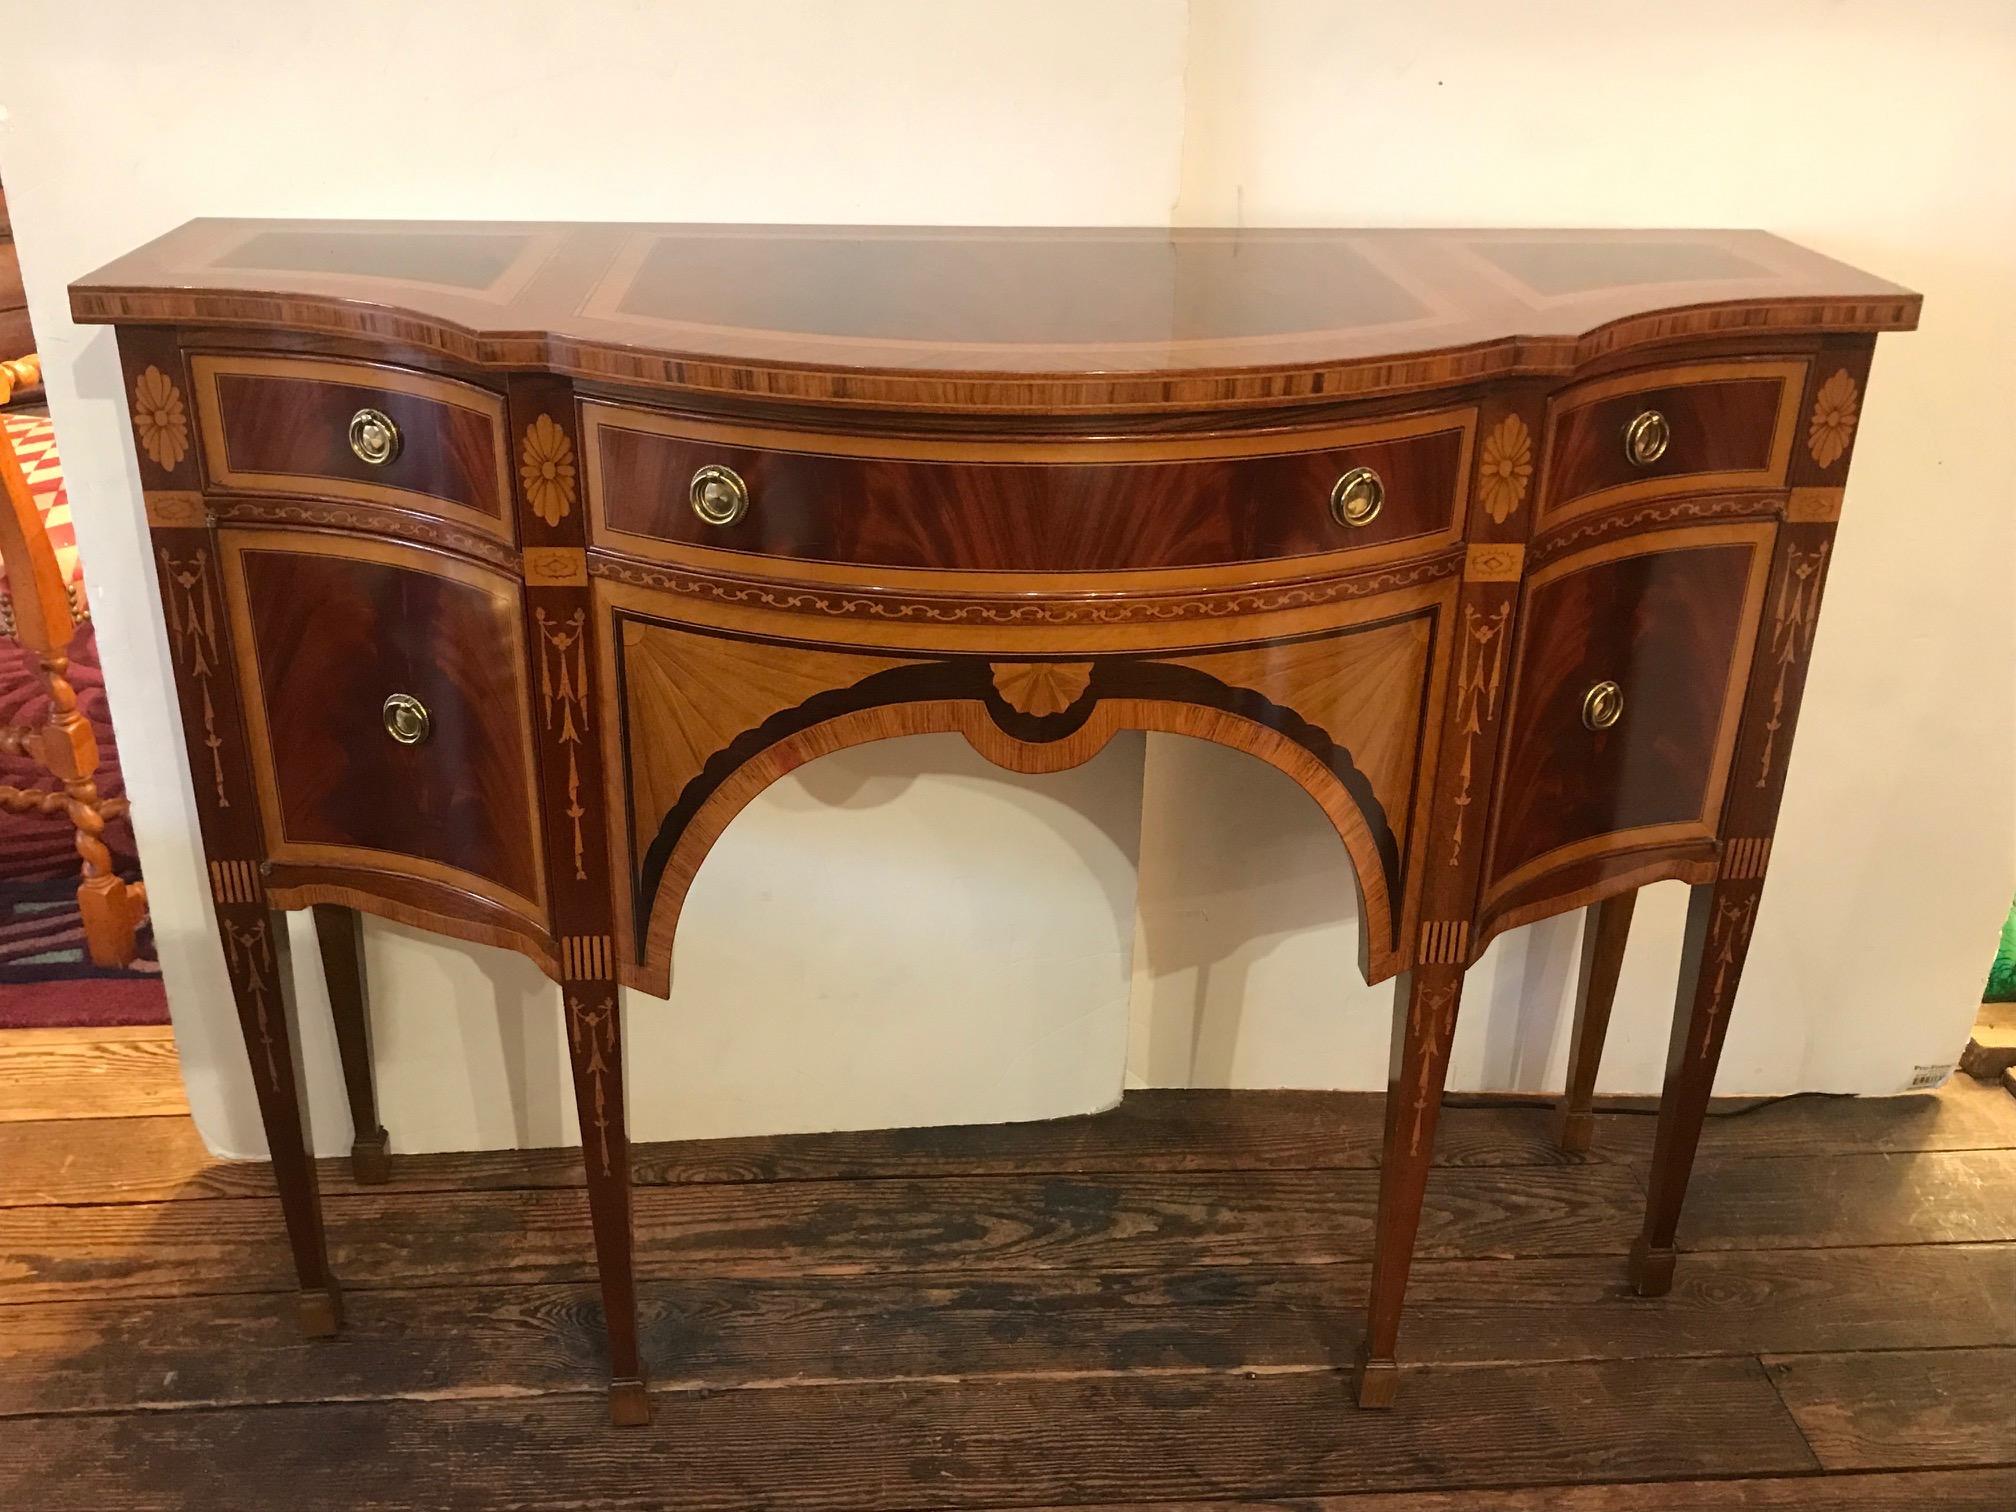 Absolutely gorgeous meticulously inlaid mixed wood console, sideboard or credenza, having 3 drawers across the top and two side panel doors that open outward to reveal storage.